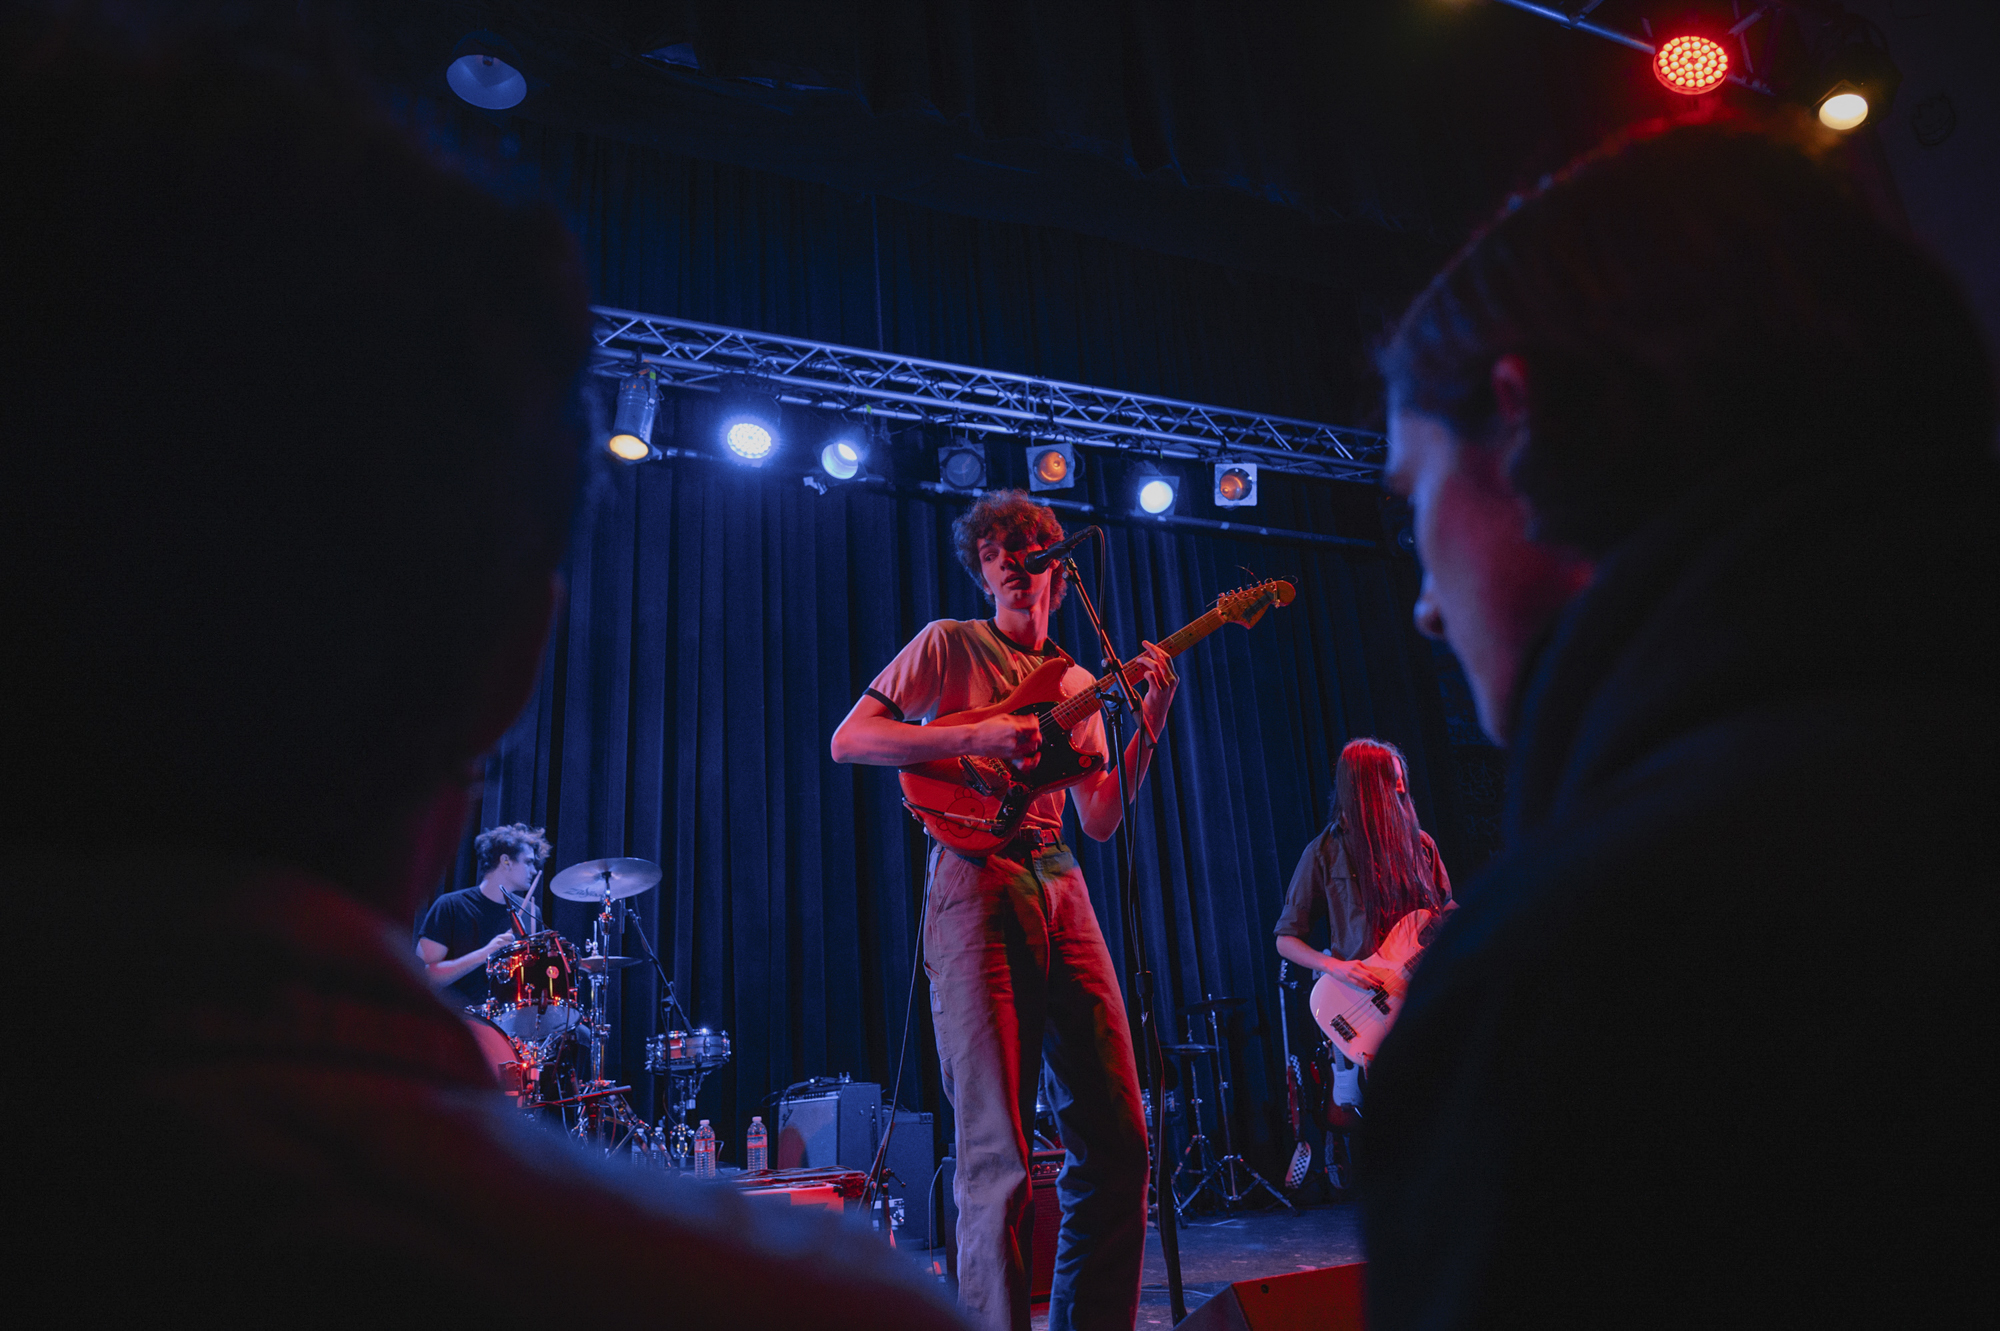 A young person plays a guitar while singing into a microphone alongside accompanying musicians playing the drums and the bass guitar under neon red and blue lights.